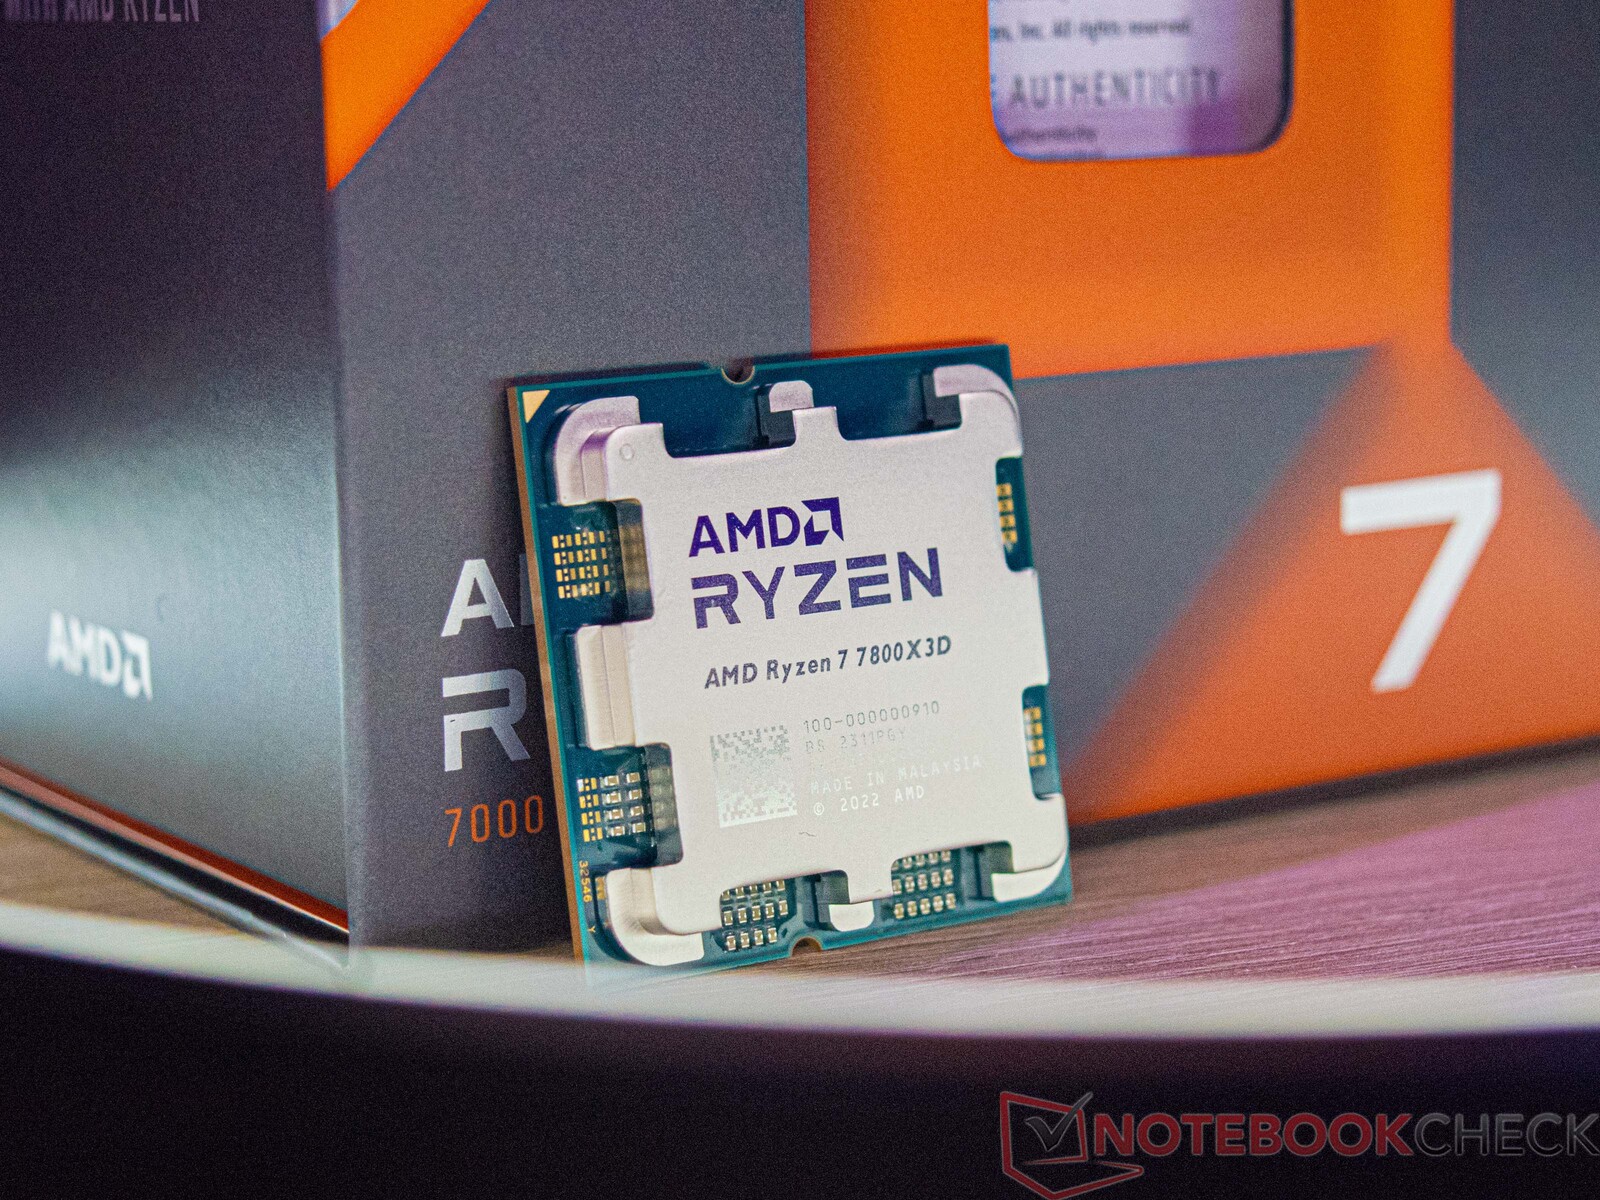 AMD Ryzen 7 7800X3D is 7% faster in gaming on average than Core i9-13900K  according to new AMD data 